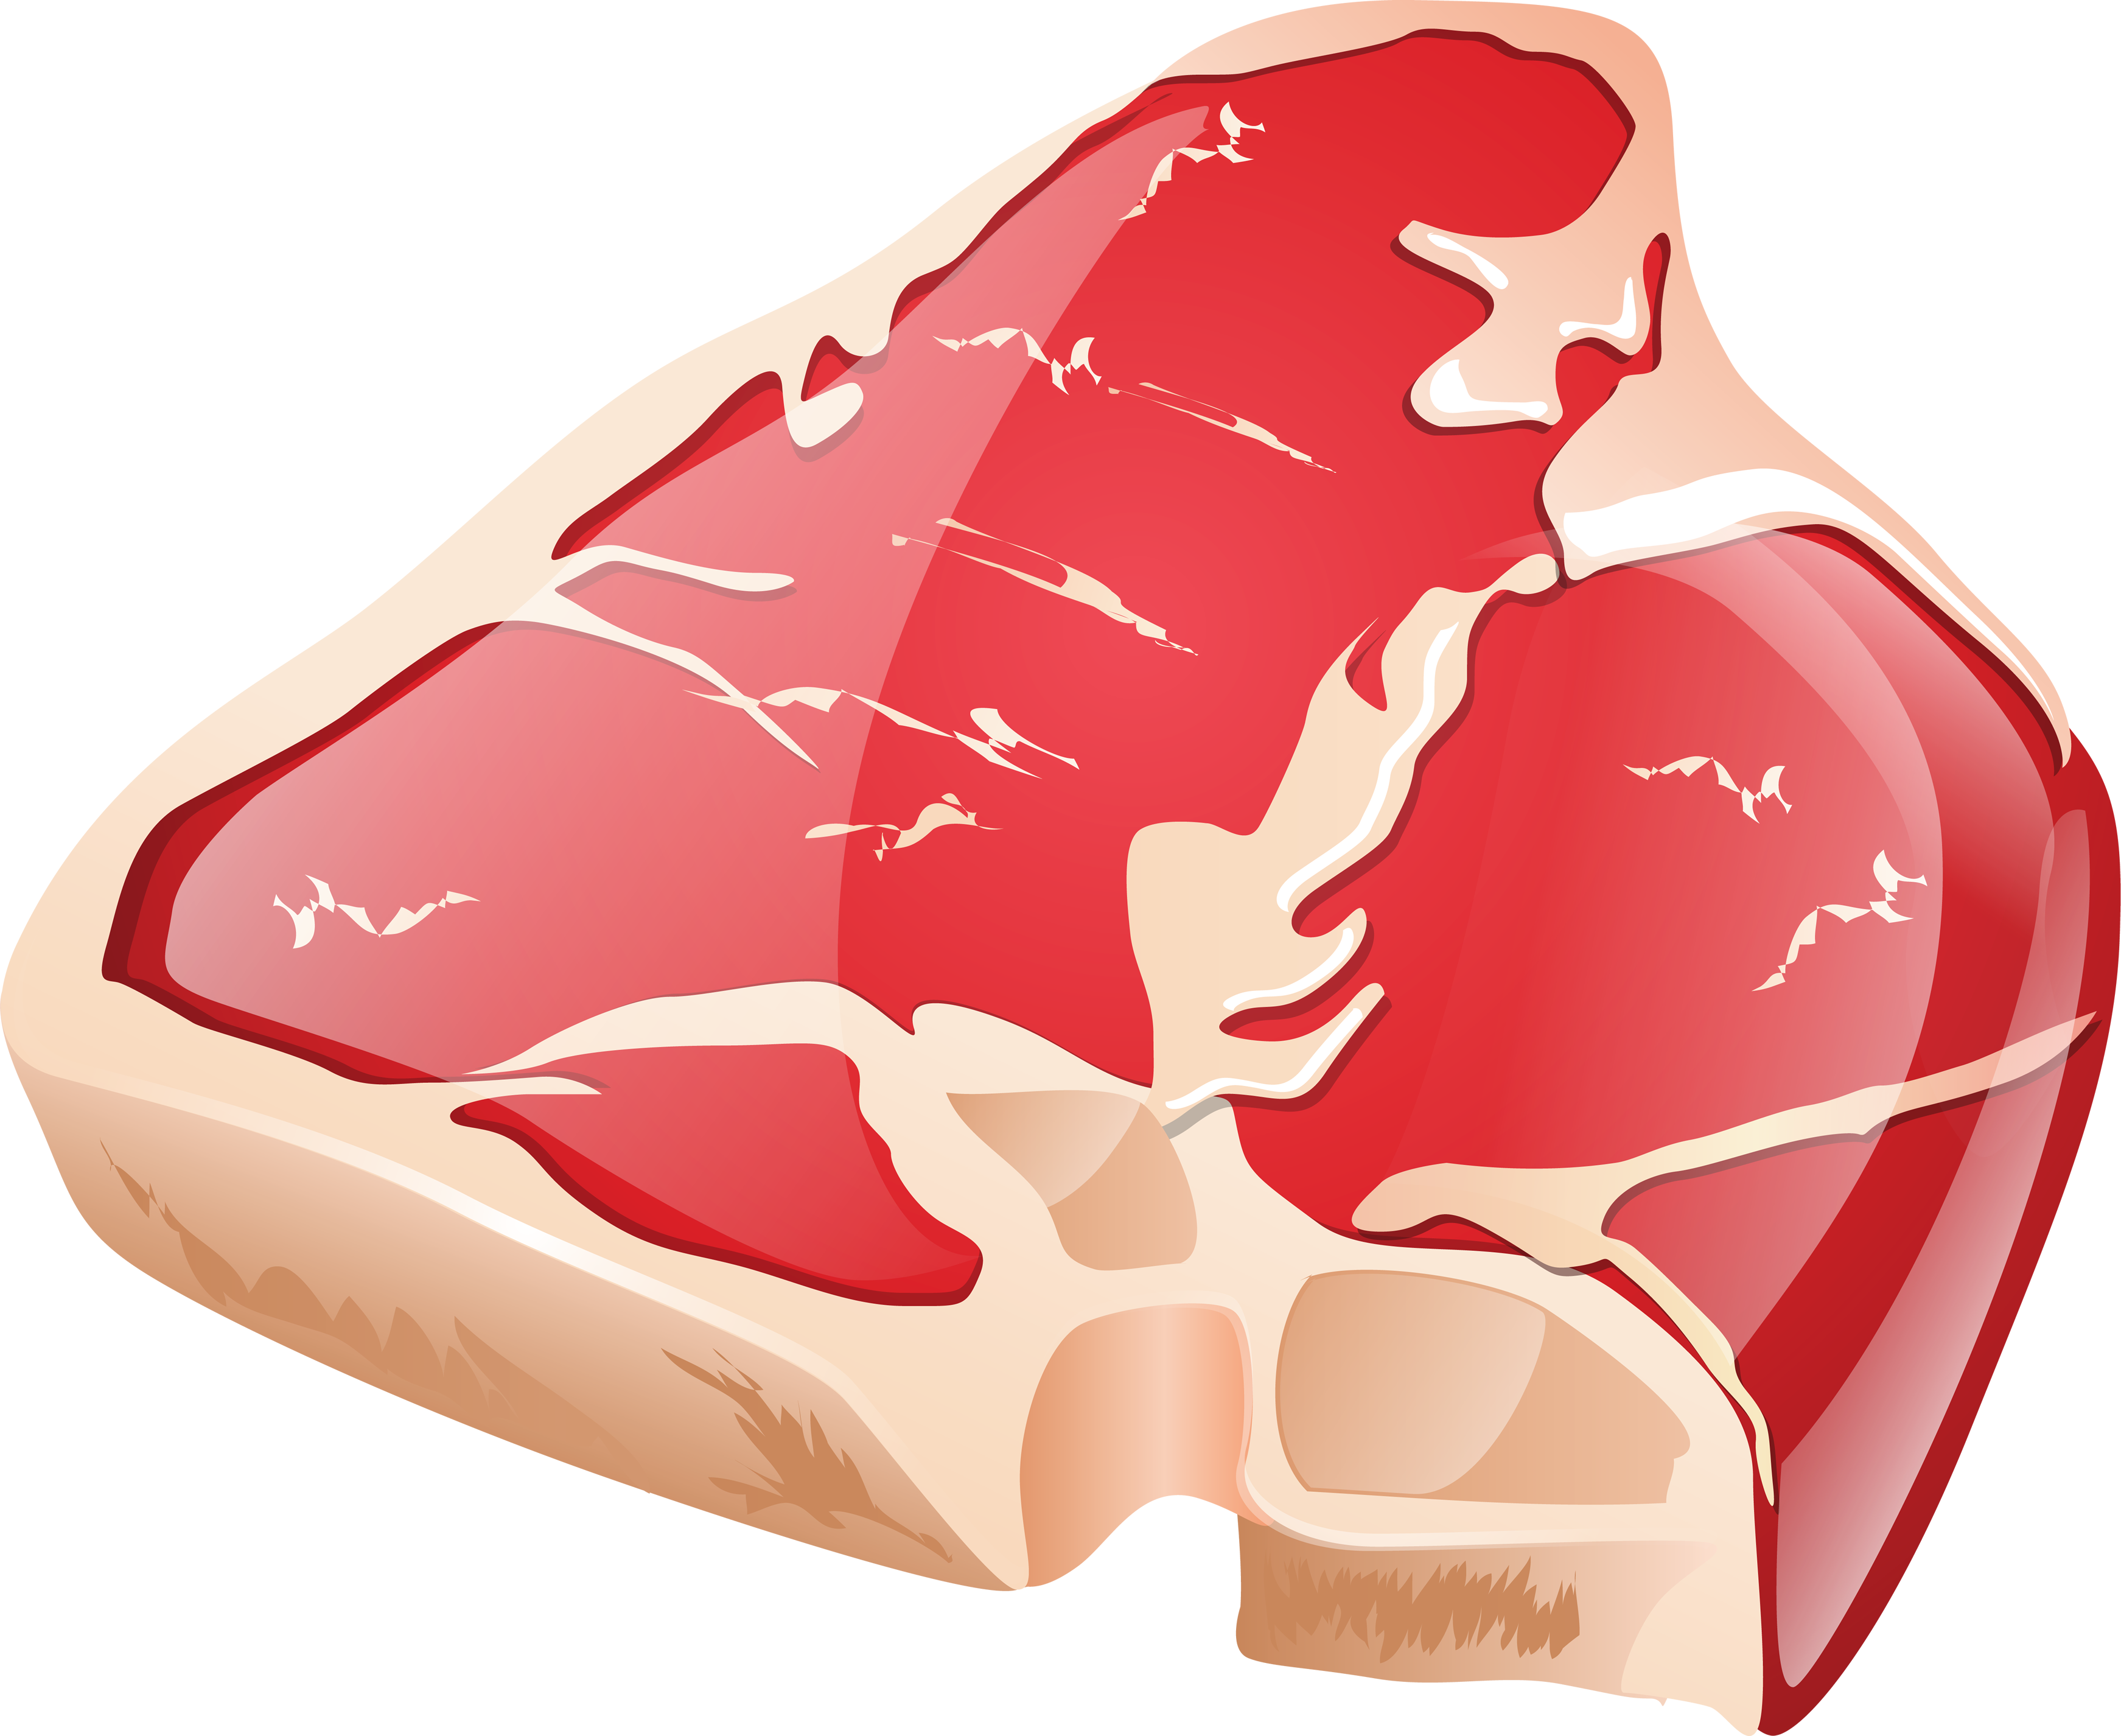 Meat Png Picture - Meat, Transparent background PNG HD thumbnail